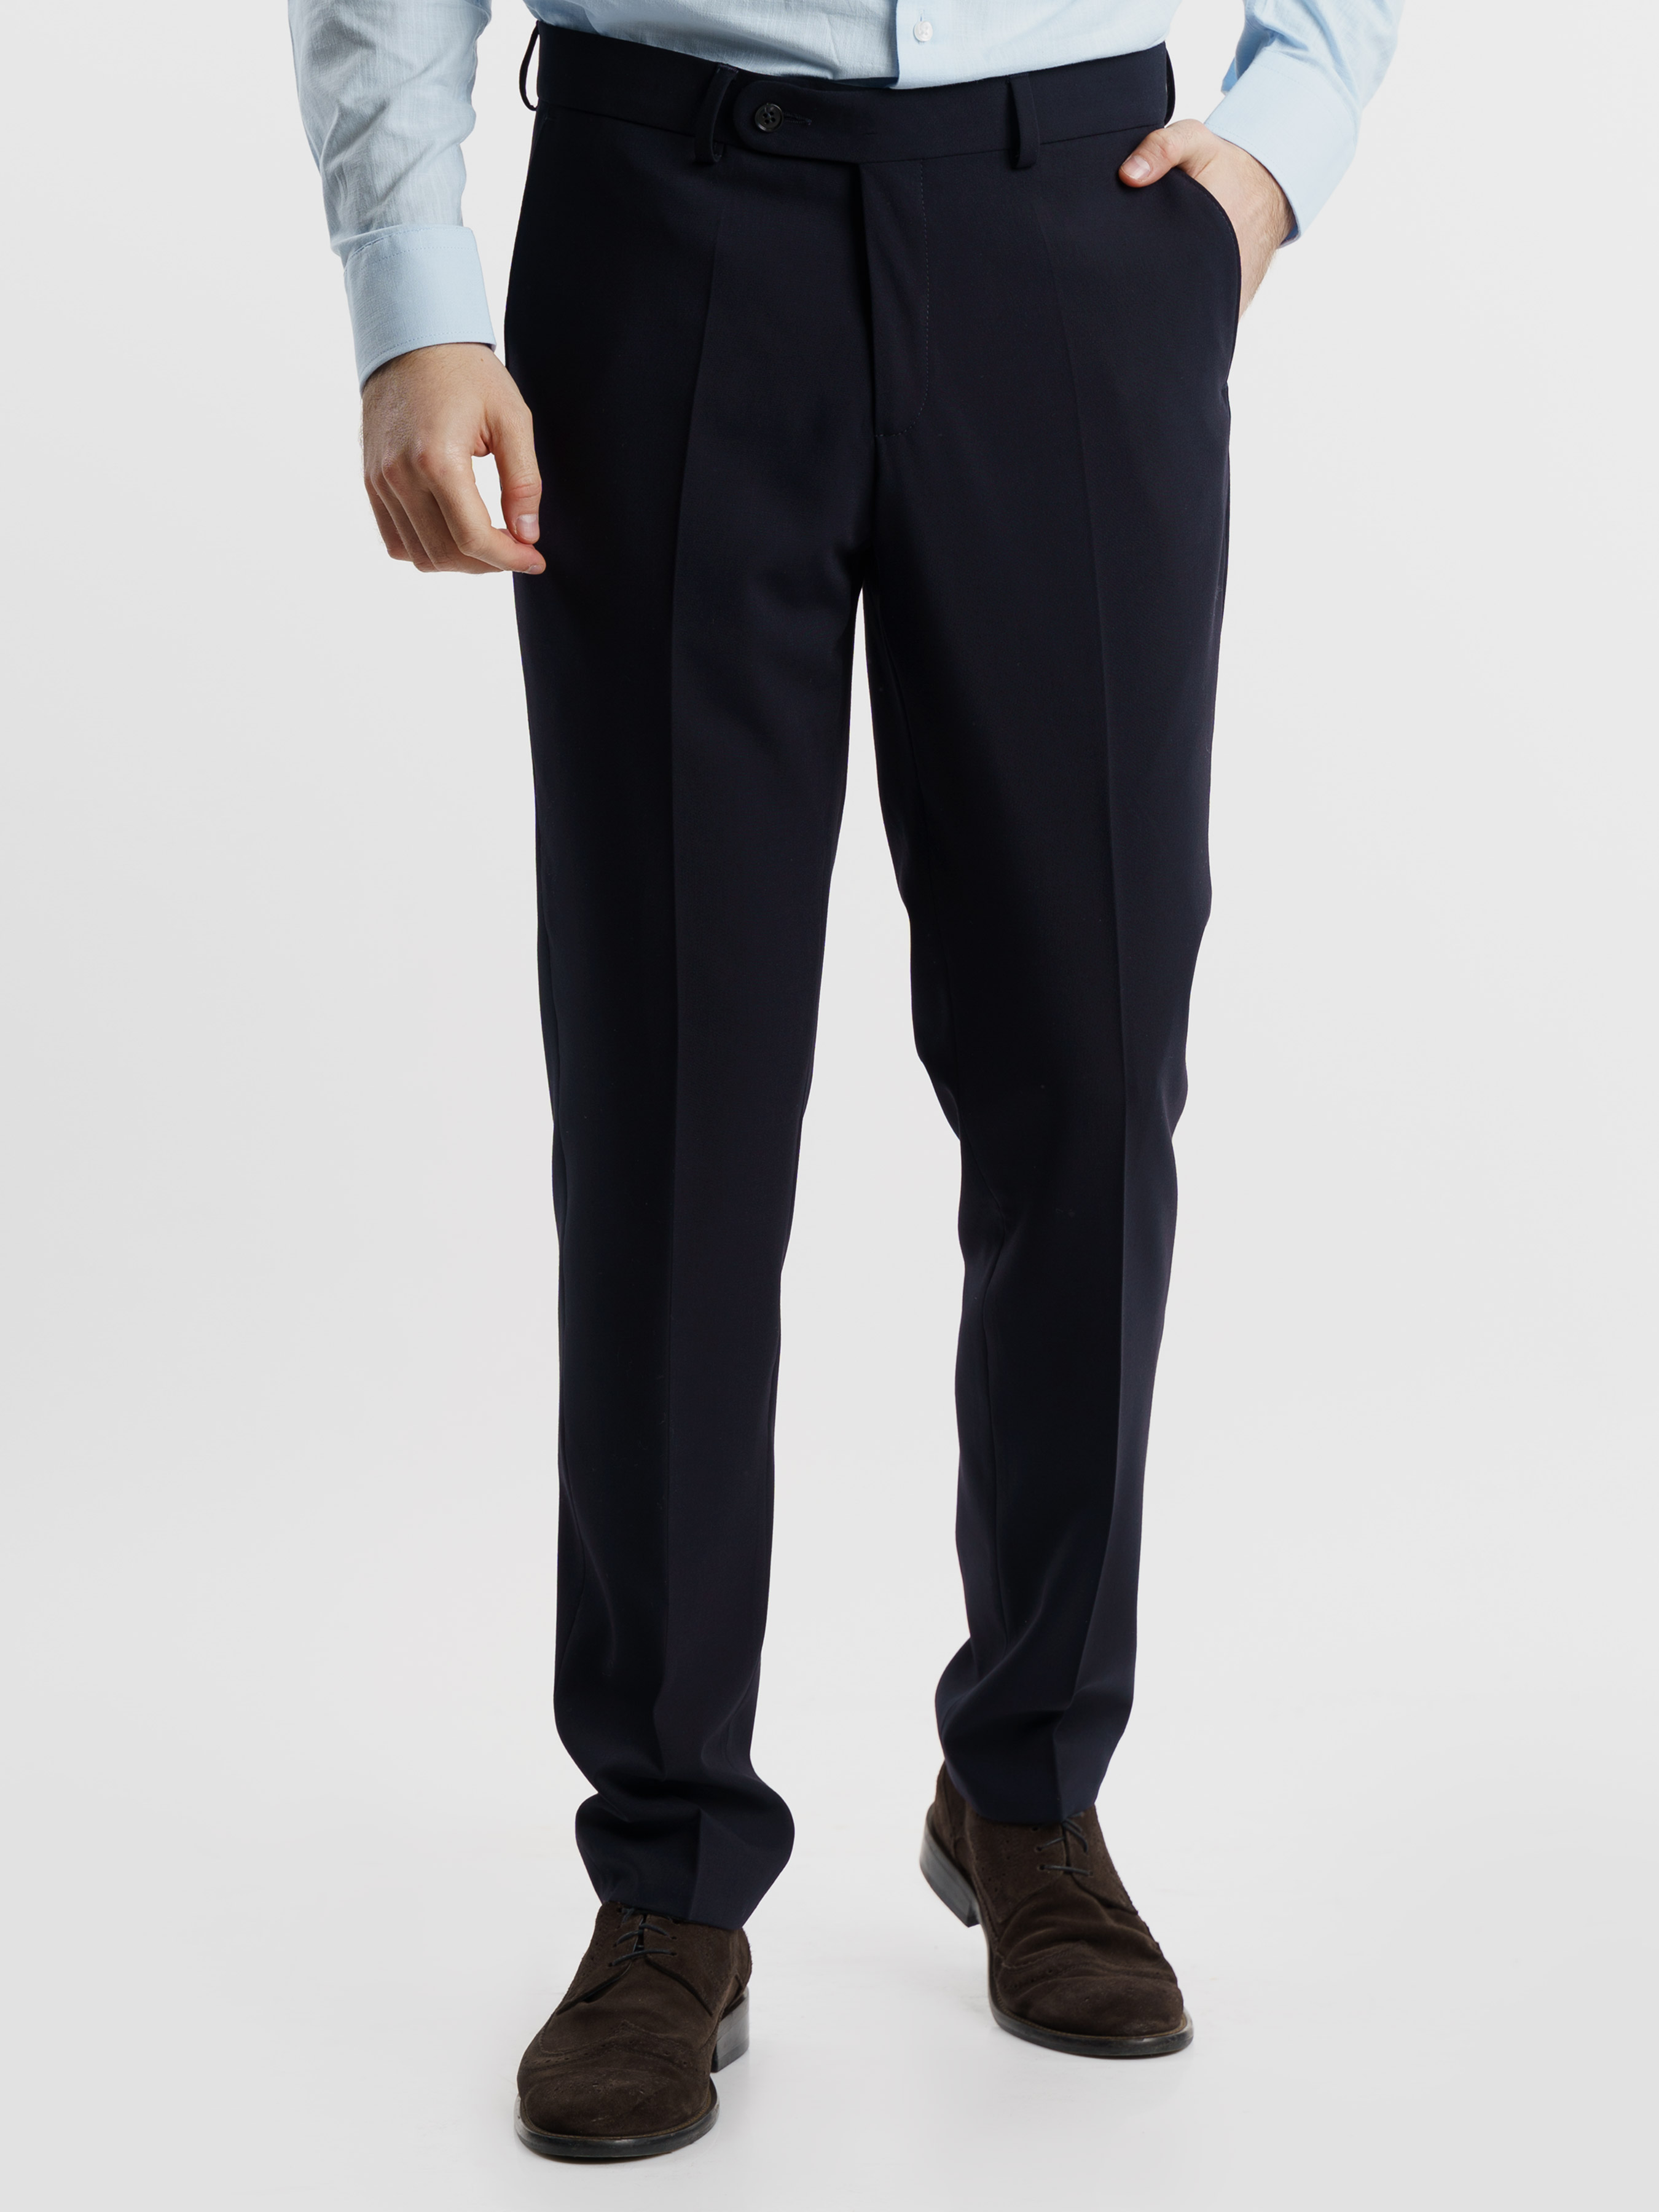 To men :: Men's clothing :: Suits :: Arber single-breasted dark blue suit